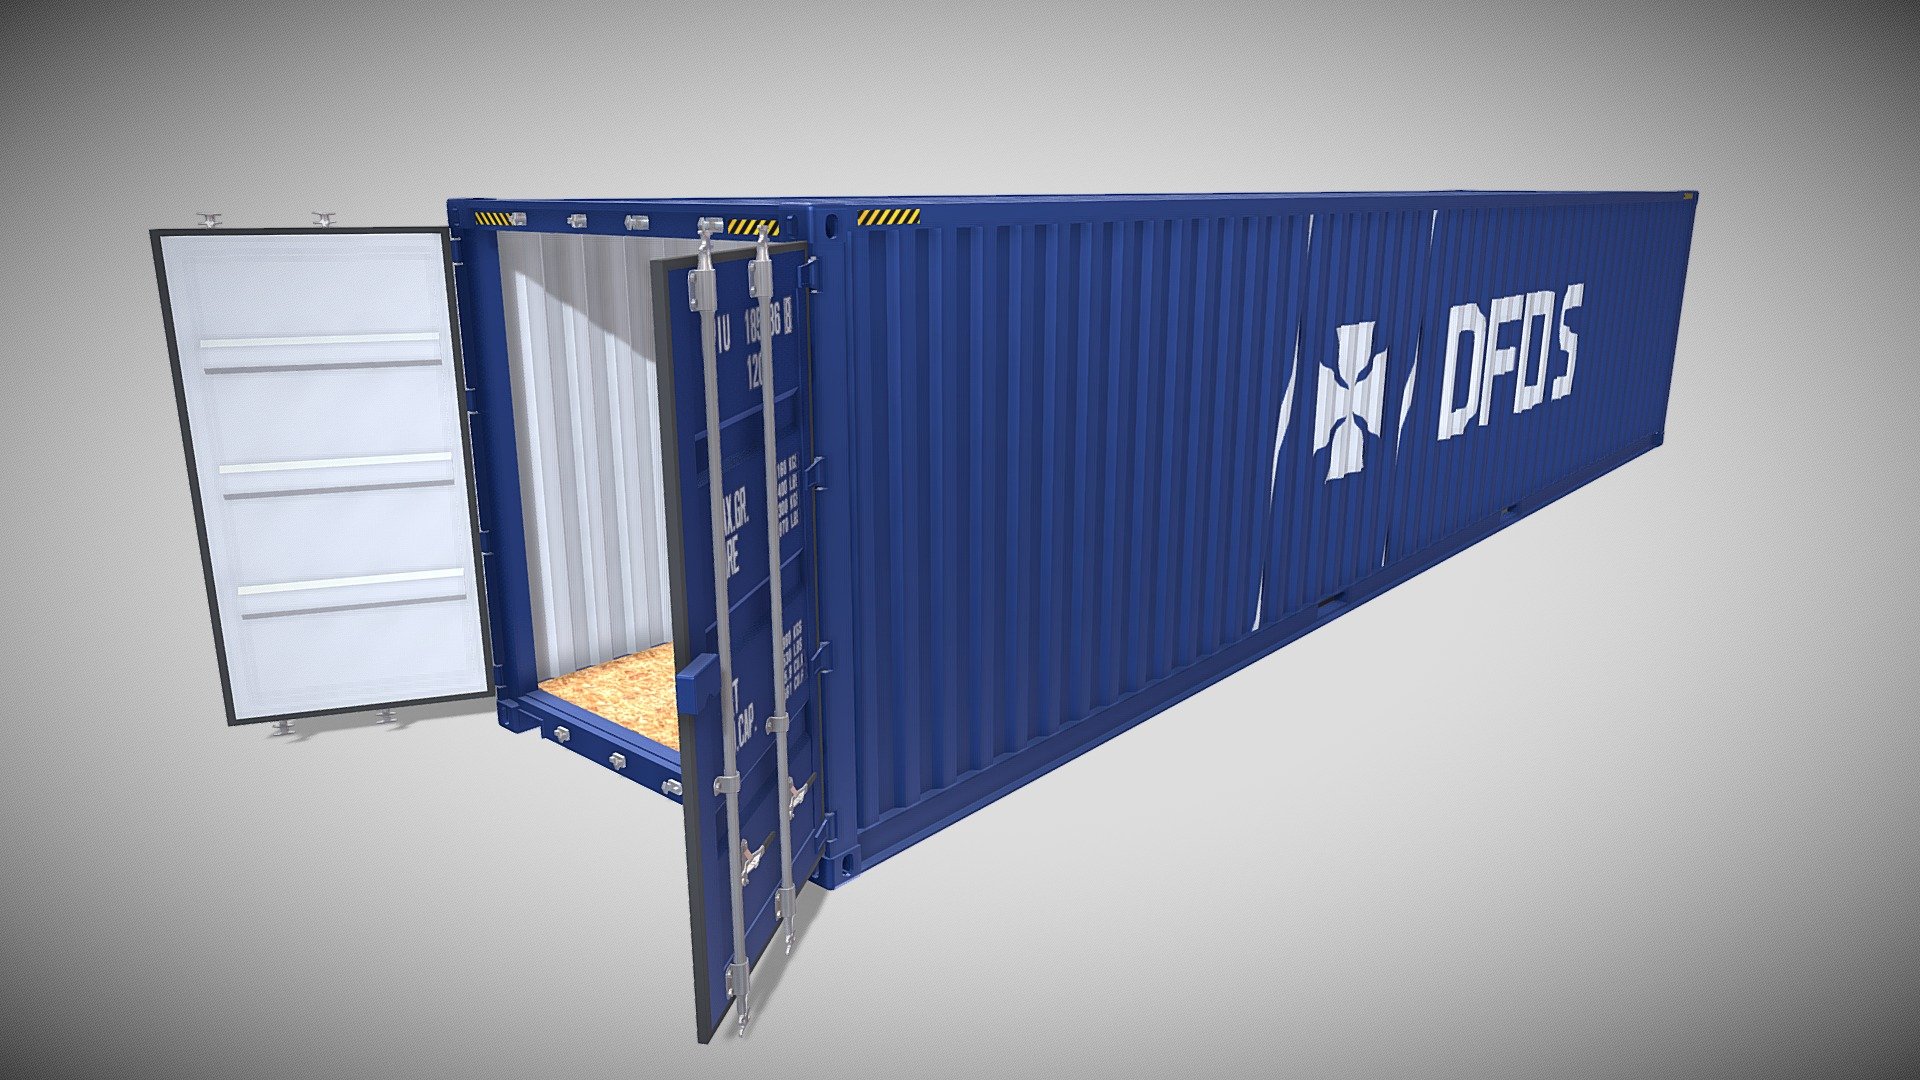 40ft Shipping Container 3d model rendered with Cycles in Blender, as per seen on attached images. 

File formats:
-.blend, rendered with cycles, as seen in the images;
-.obj, with materials applied;
-.dae, with materials applied;
-.fbx, with materials applied;
-.stl;

-.blend, with doors open, rendered with cycles, as seen in the images;
-.obj, with doors open, with materials applied;
-.dae, with doors open, with materials applied;
-.fbx, with doors open, with materials applied;
-.stl;

Files come named appropriately and split by file format.

3D Software:
The 3D model was originally created in Blender 2.8 and rendered with Cycles.

Materials and textures:
The models have materials applied in all formats, and are ready to import and render.
The model comes with two png image textures.

Don't forget to rate and enjoy! - 40ft Shipping Container DFDS - Buy Royalty Free 3D model by dragosburian 3d model